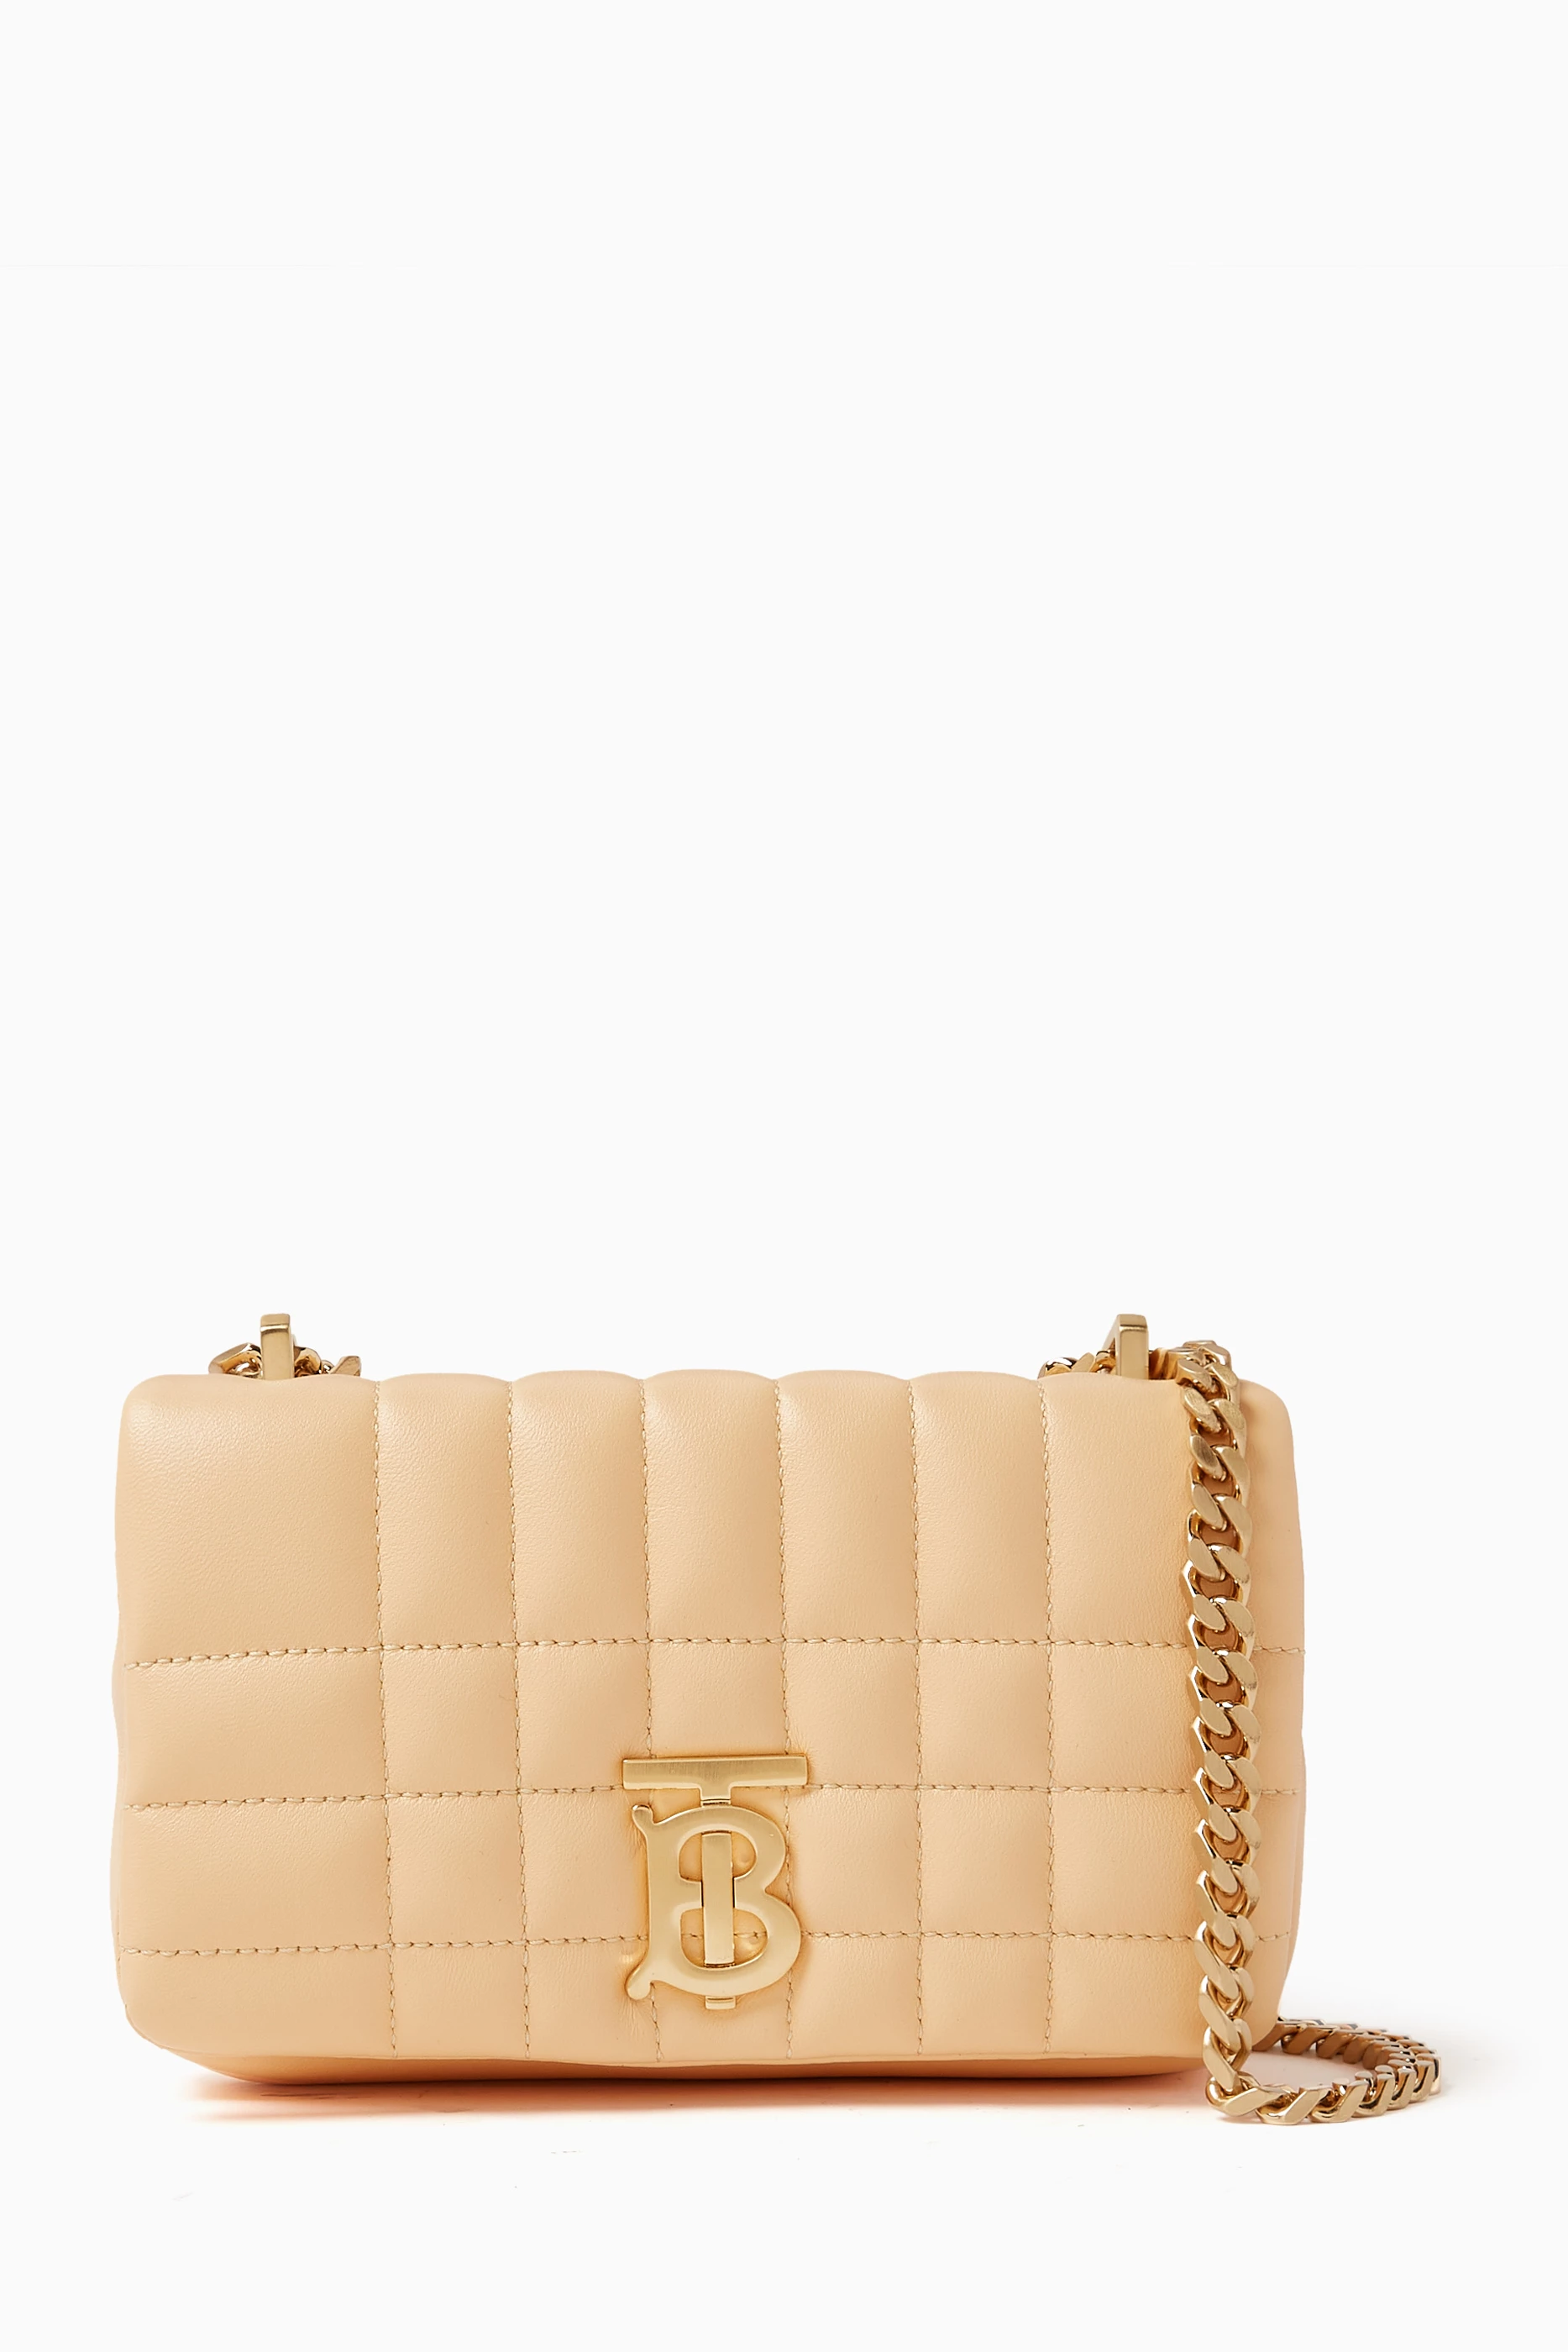 Burberry Leather Quilted Lola Clutch Bag - Neutrals - One Size